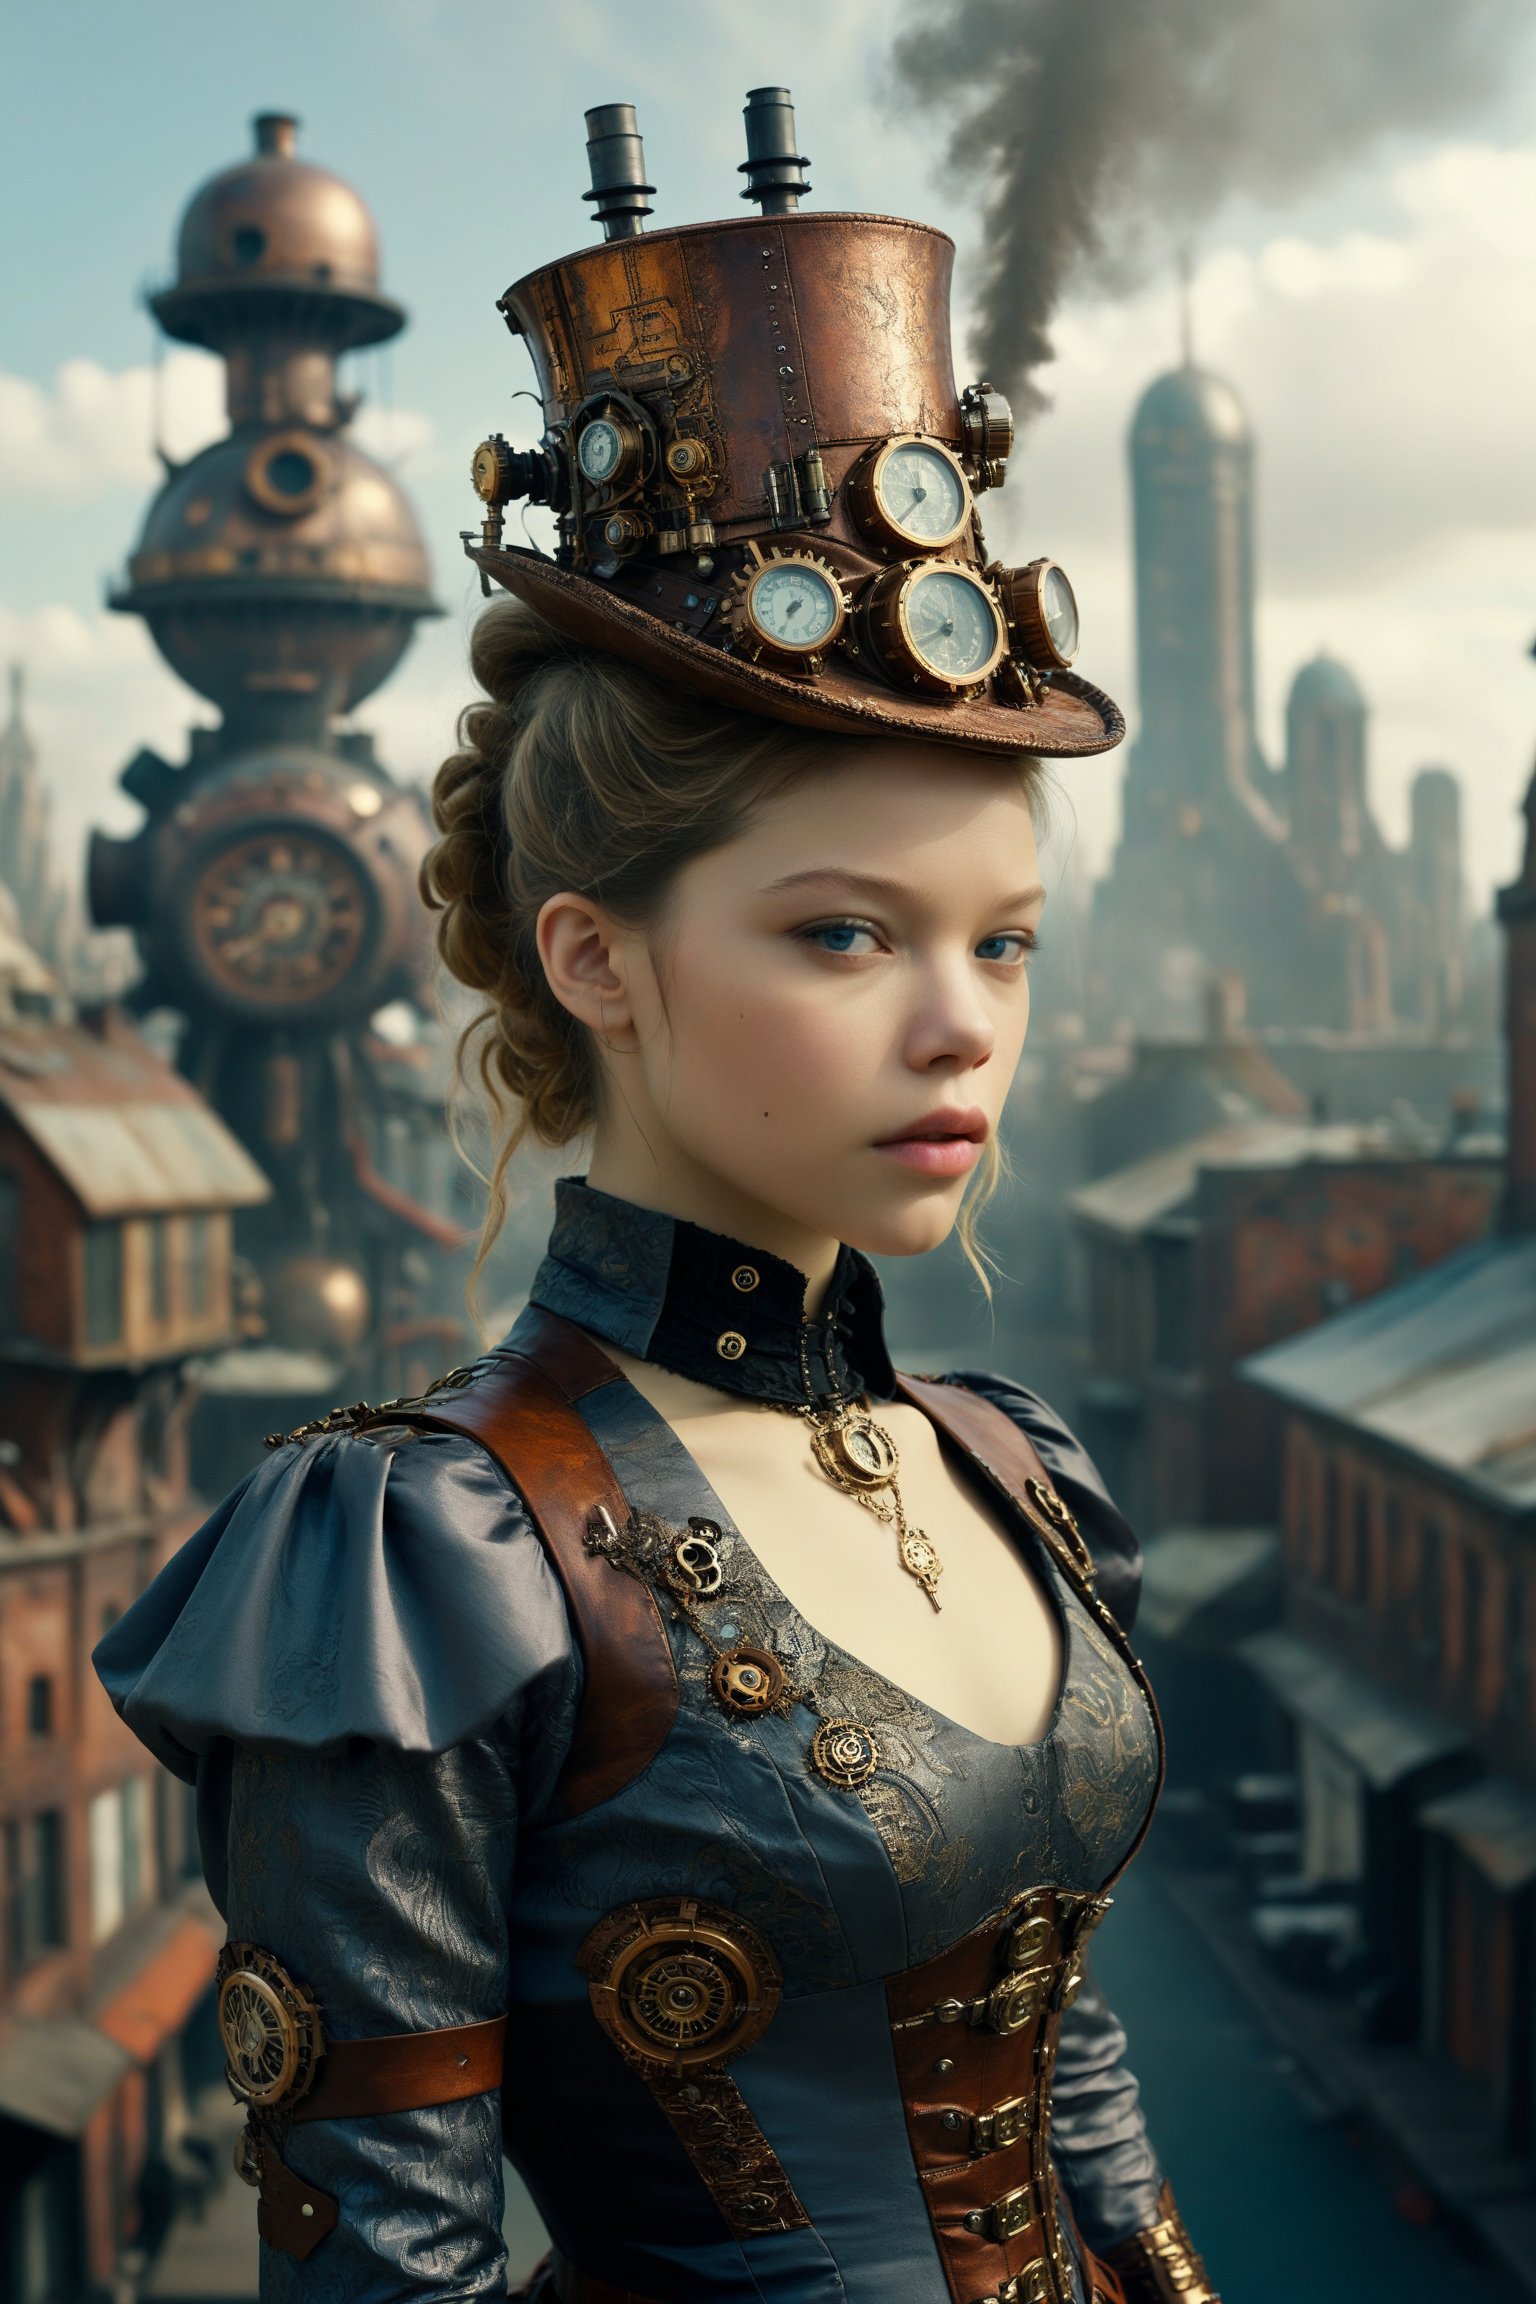 medium shot of 1girl, a beautiful Léa Seydoux. she is dressed in an elaborate steampunk outfit. behind her is a steampunk cityscape.